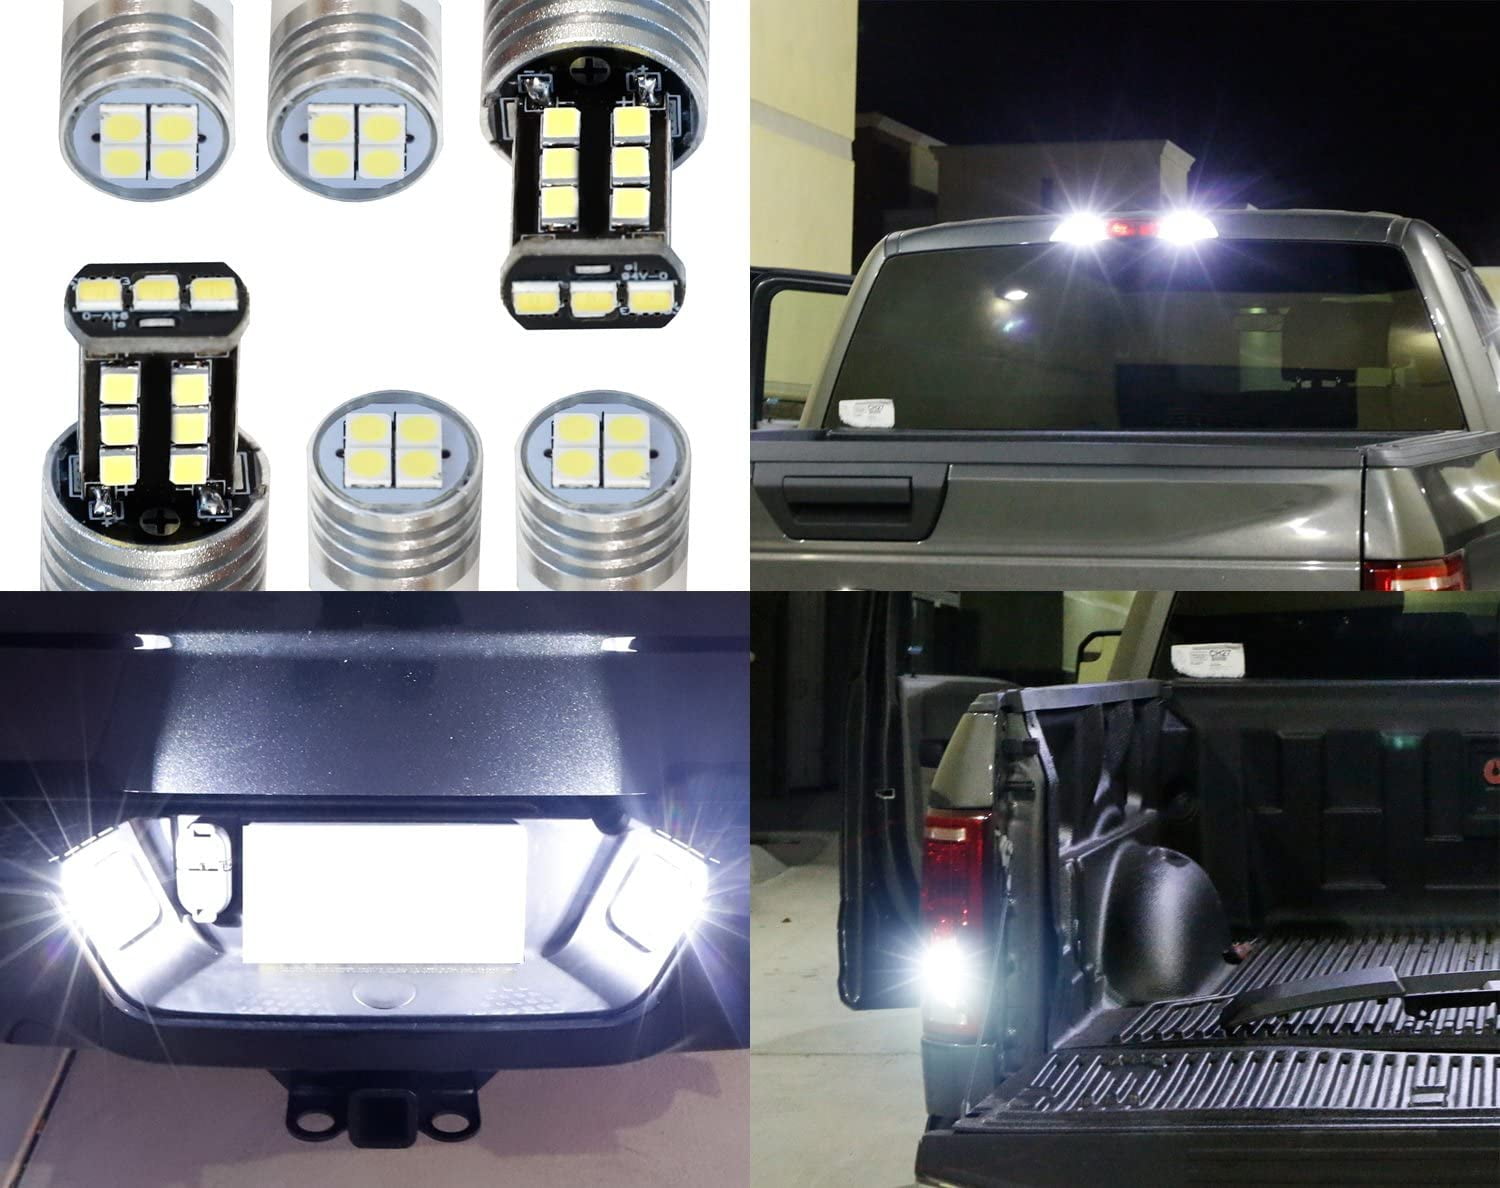 iJDMTOY Complete 6pcs Super Bright Xenon White LED License Plate Backup and High Mount Clearance Lights Combo Kit For 2018-up Ford F150 2017-up F250 F350